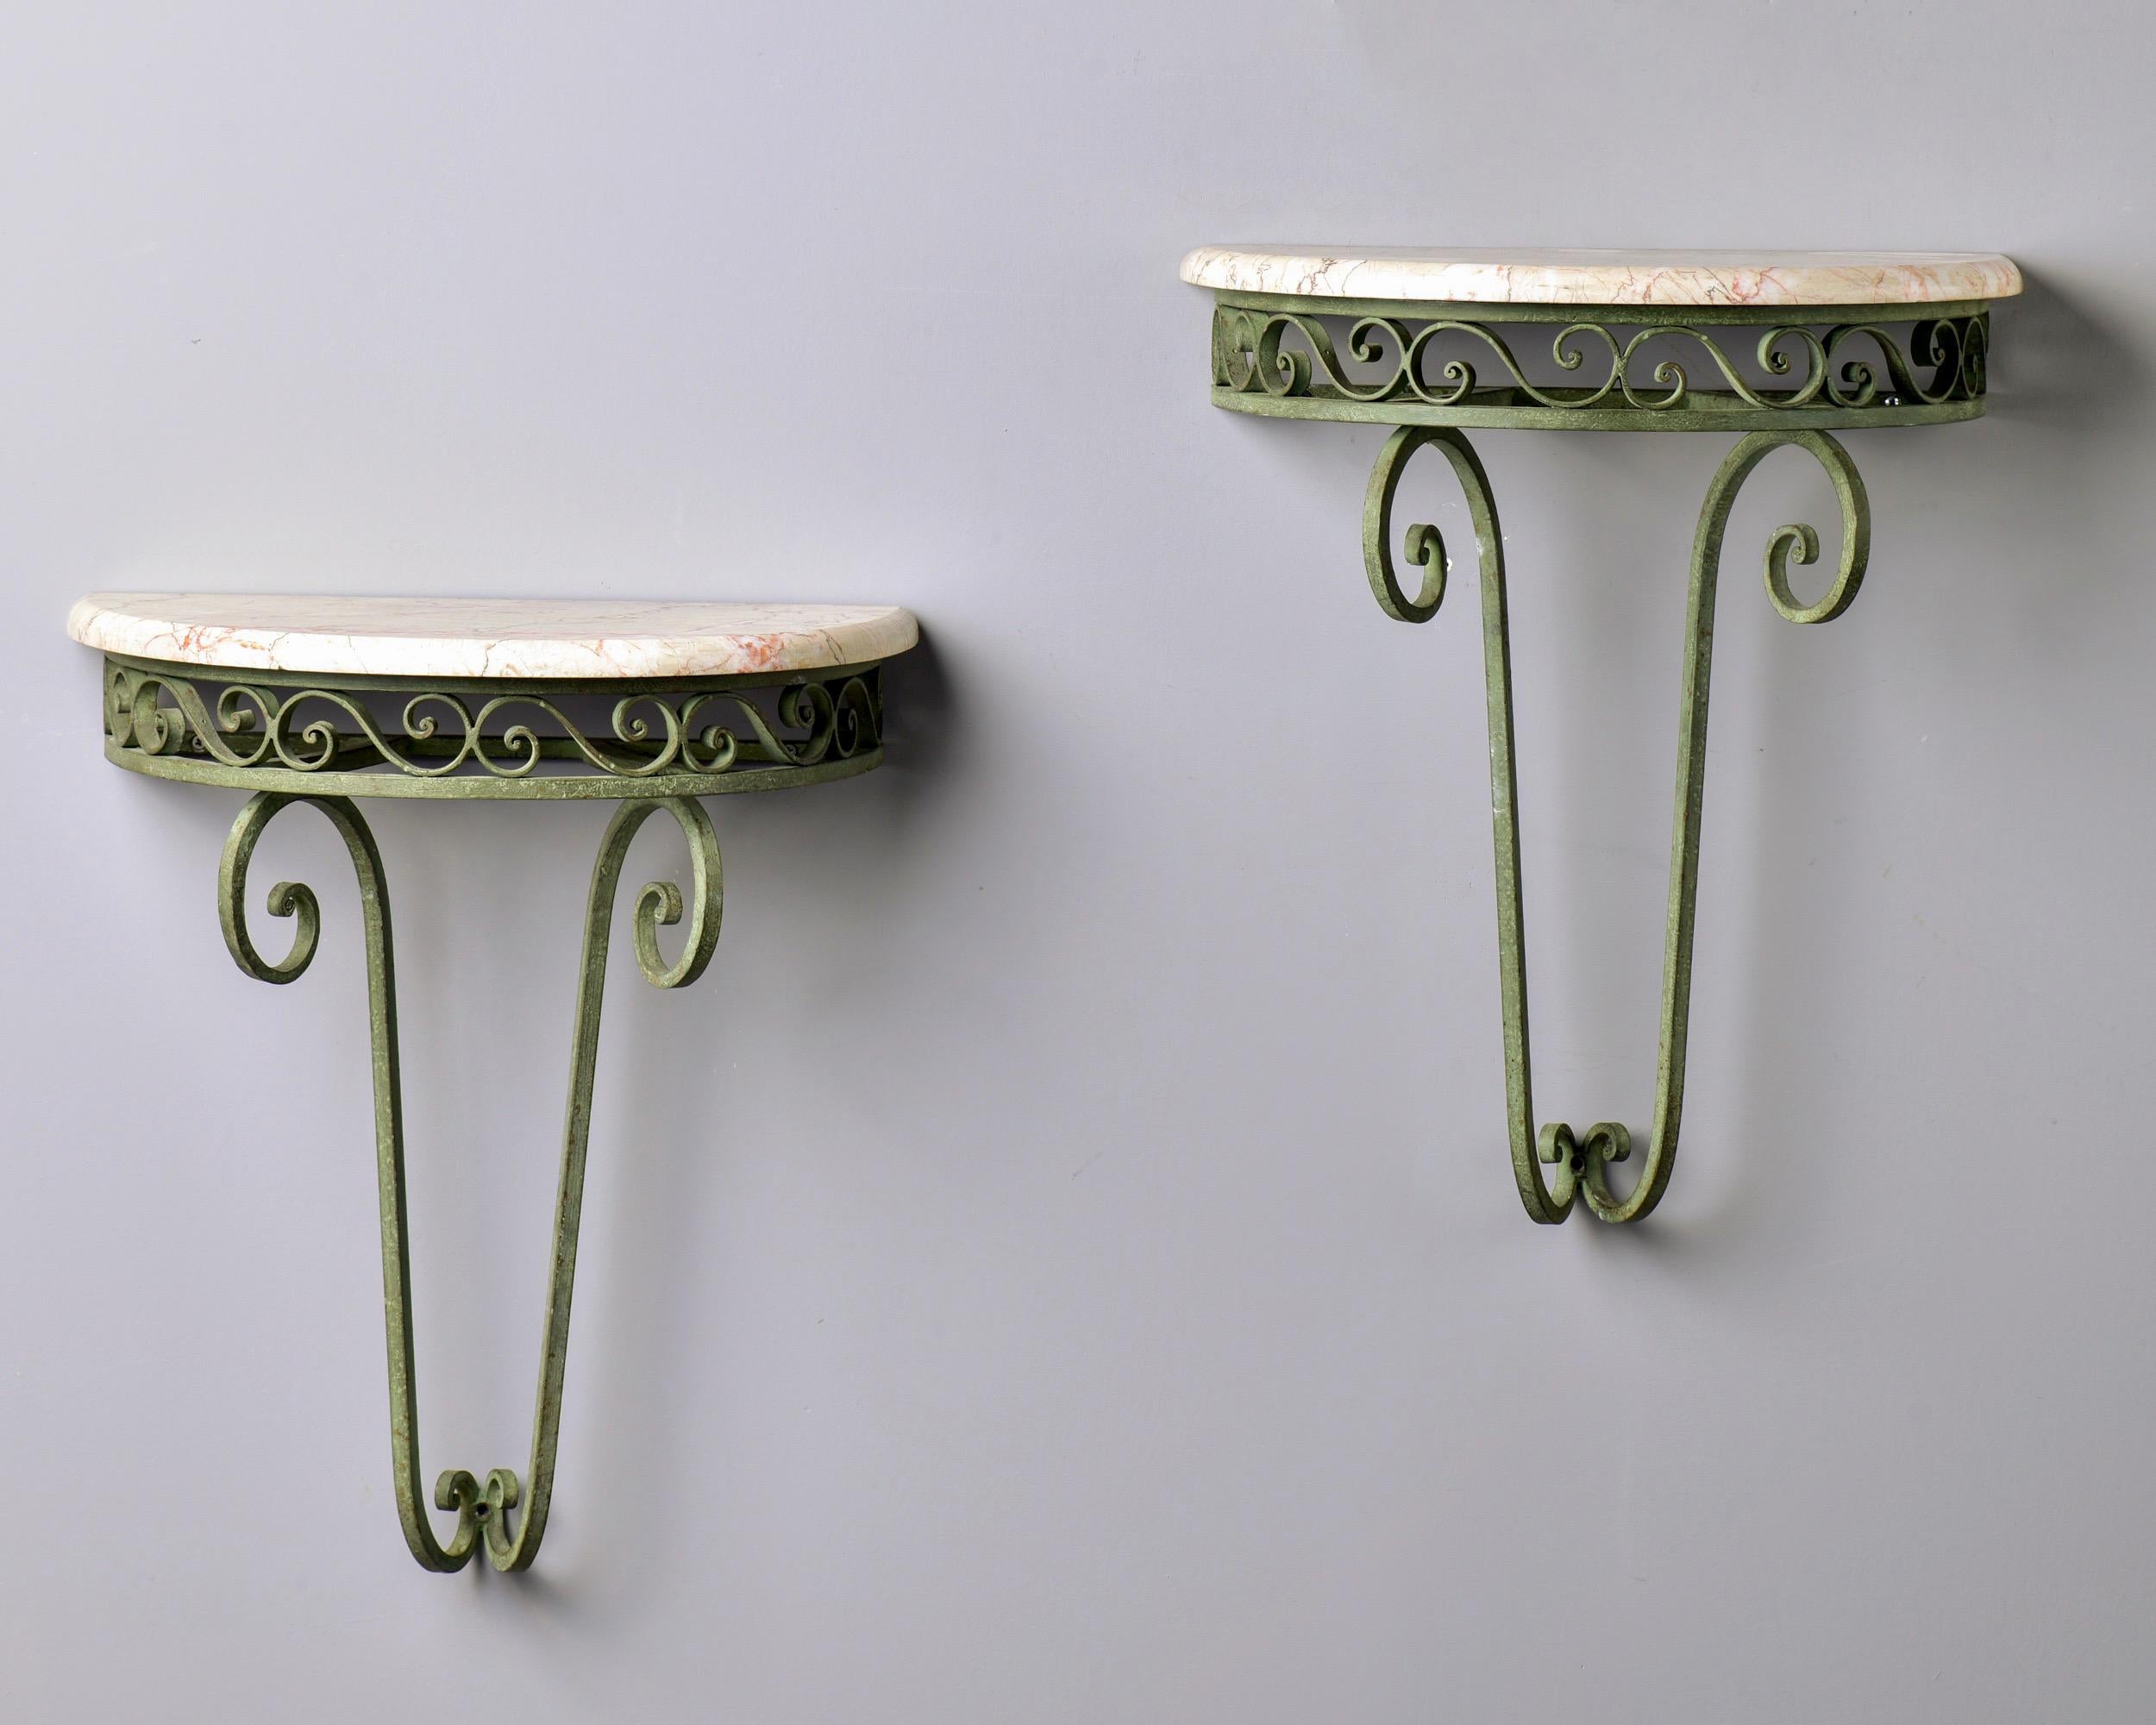 Circa 1930s pair of French wall-hung demilune consoles with iron frames in original green finish and marble tops in shades of cream and white with dark gray and apricot streaks. Unknown maker. Sold and priced as a pair. Unknown maker. Sold and